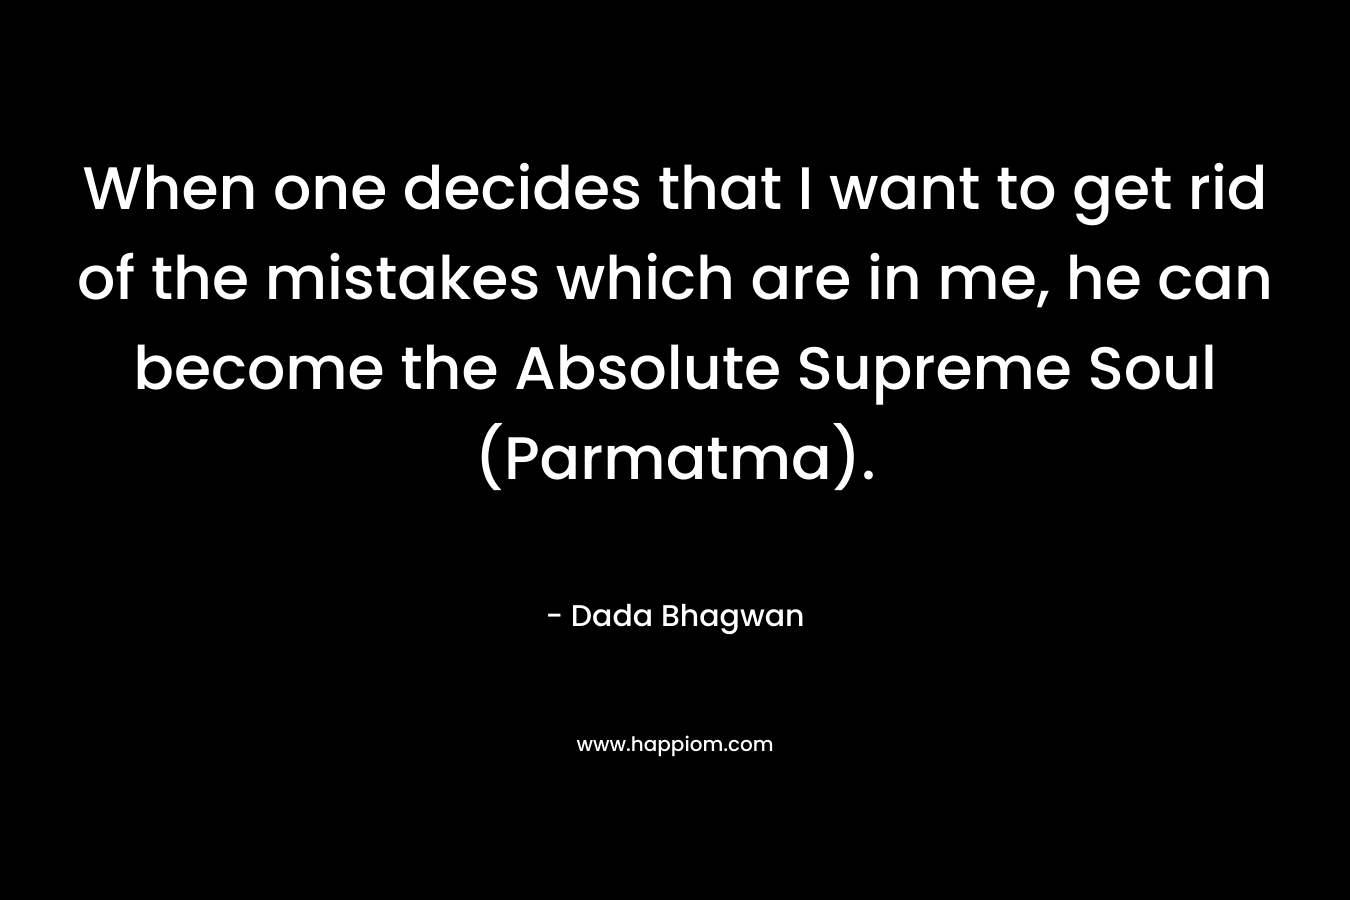 When one decides that I want to get rid of the mistakes which are in me, he can become the Absolute Supreme Soul (Parmatma). – Dada Bhagwan